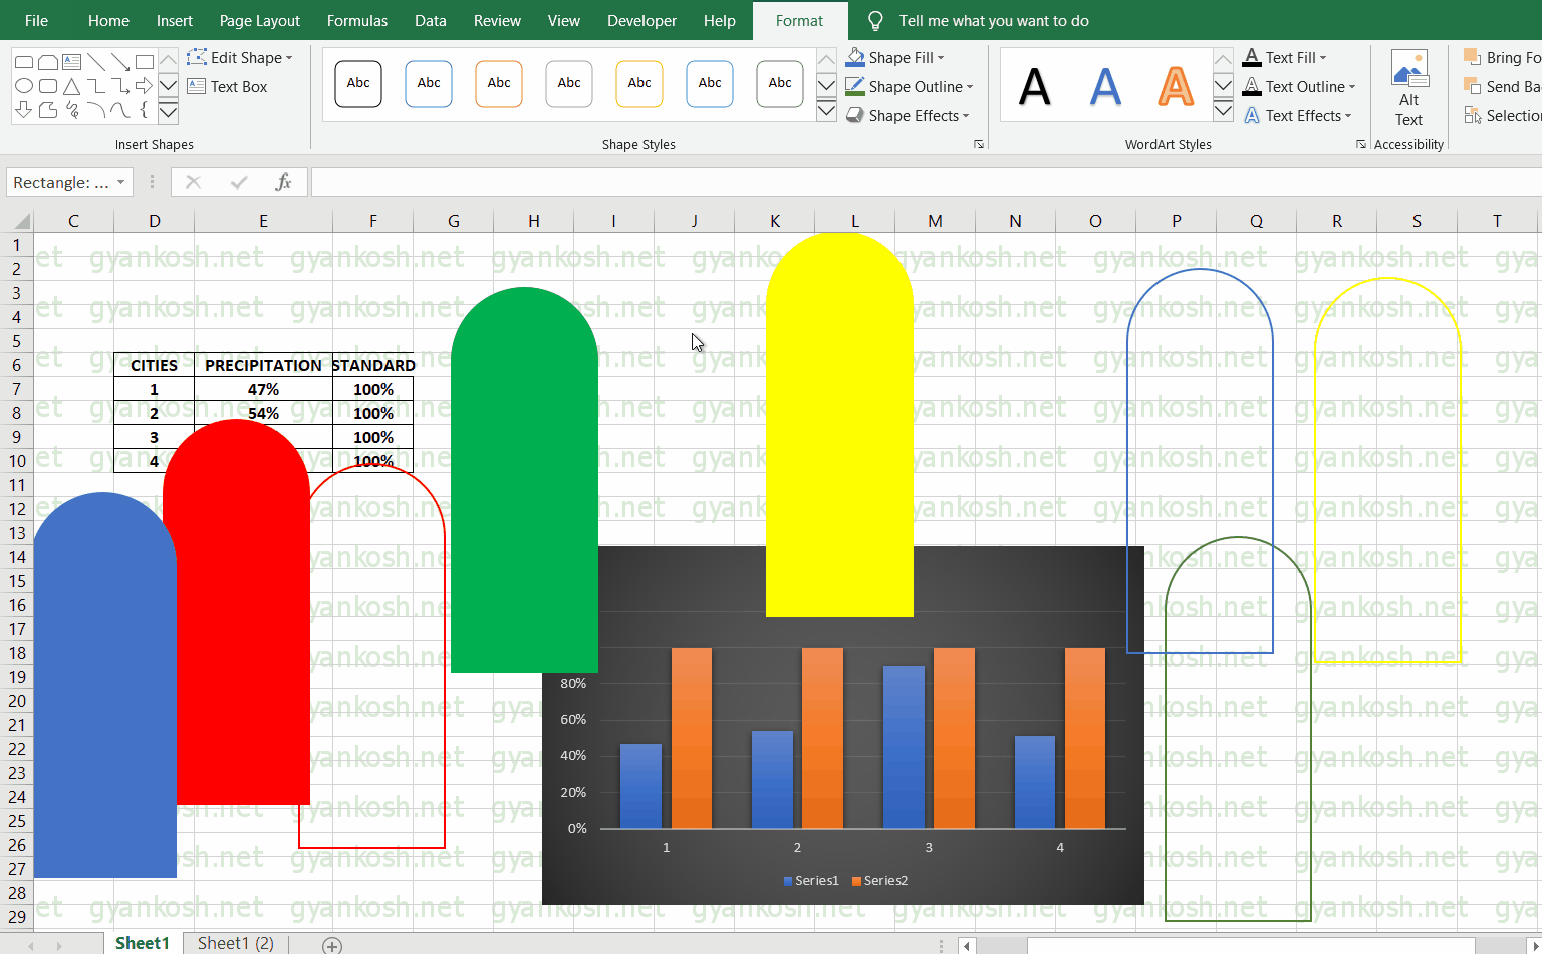 3D EDITING OF SHAPES IN EXCEL